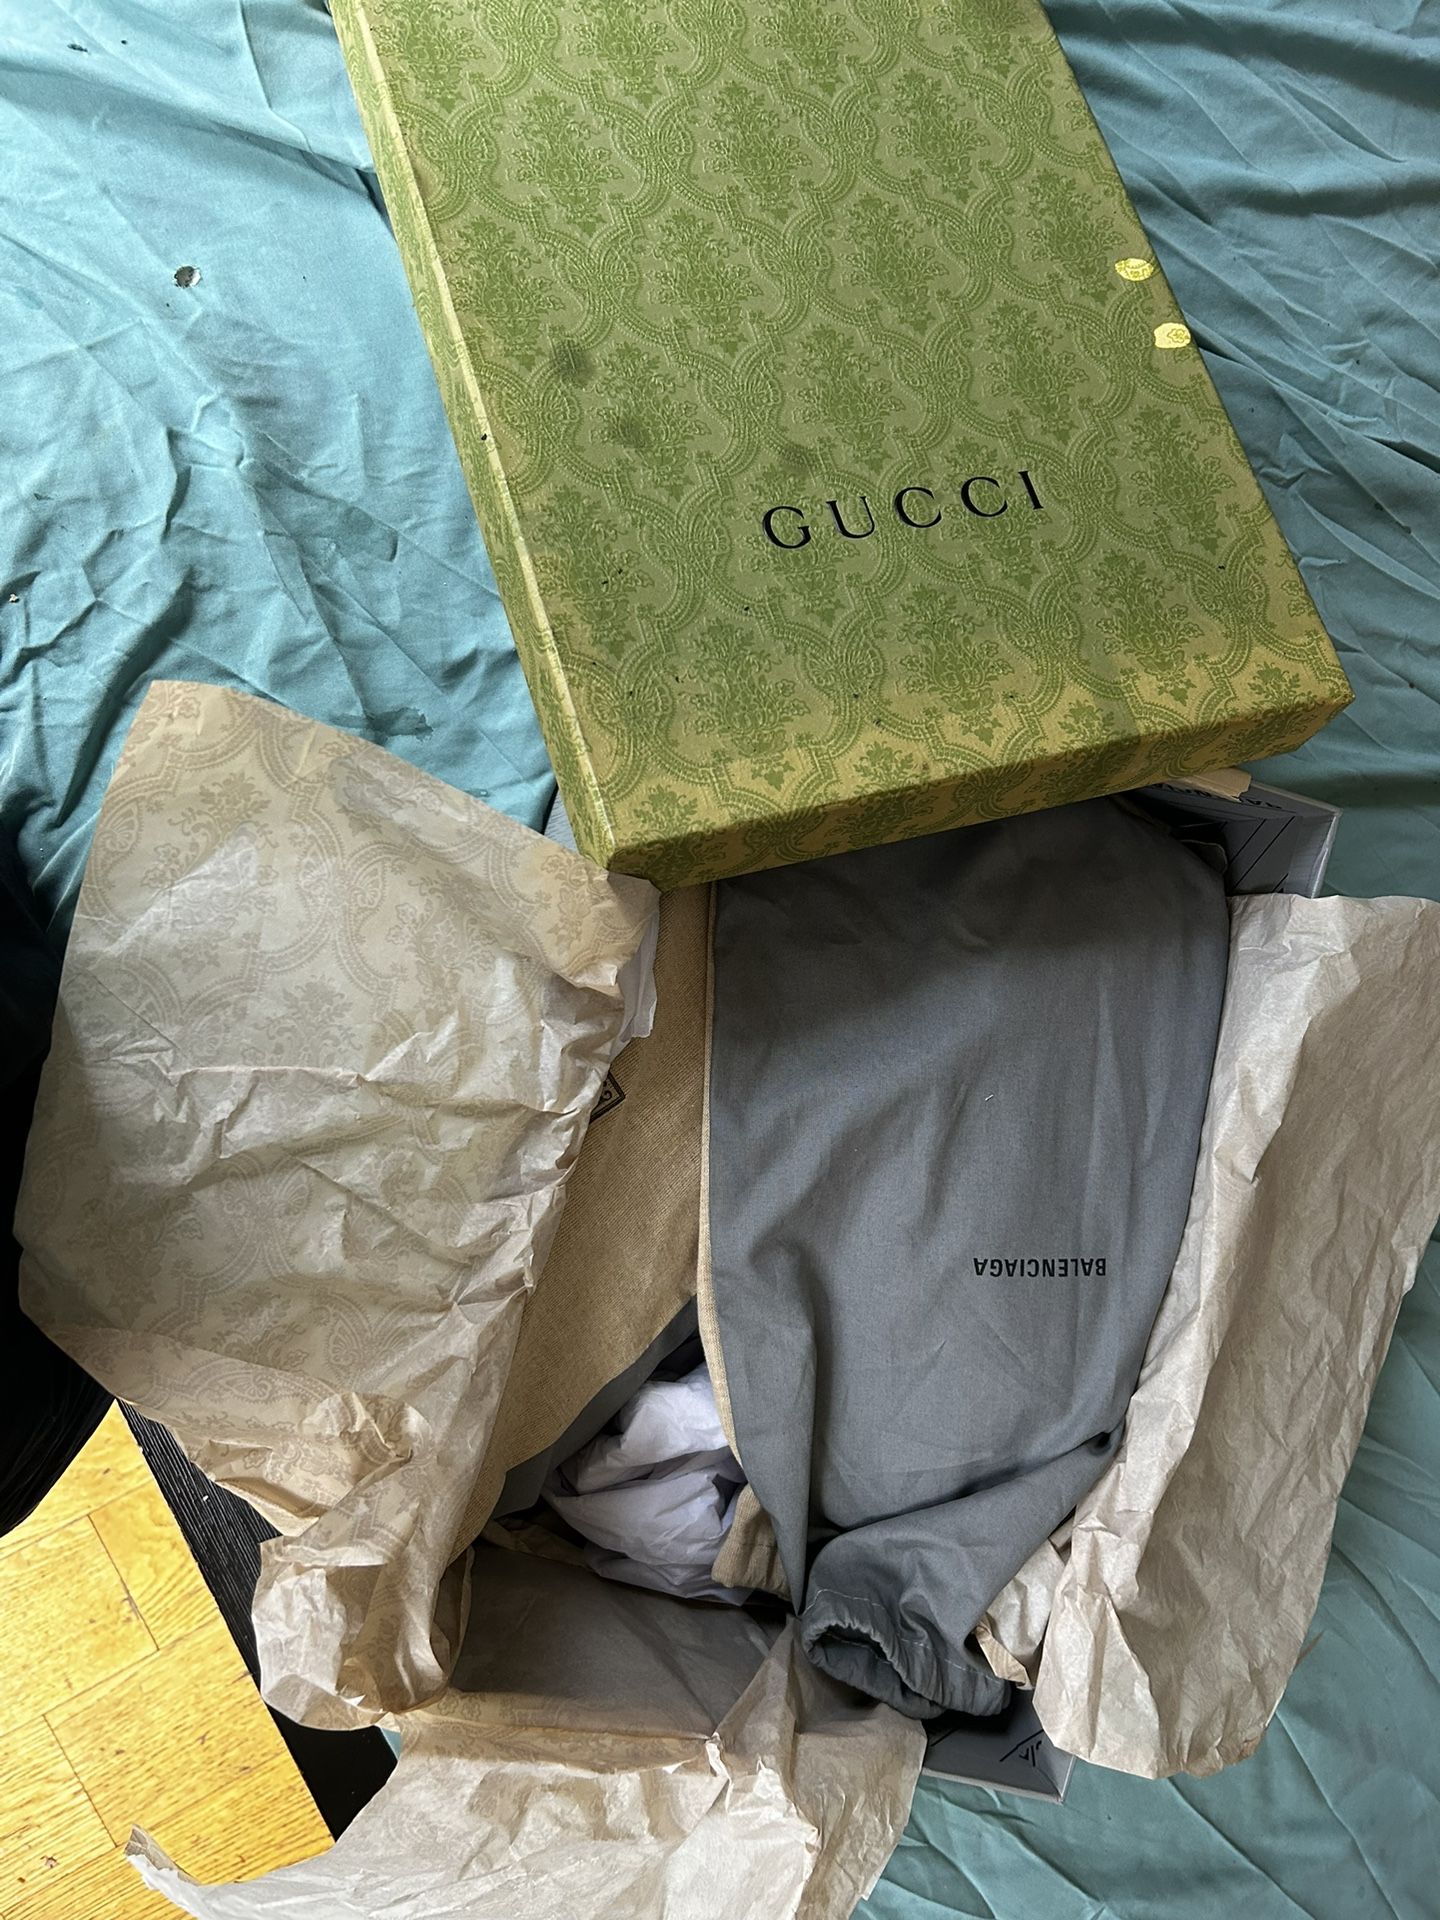 Gucci X Balenciaga jacket for Sale in Bowie, MD - OfferUp